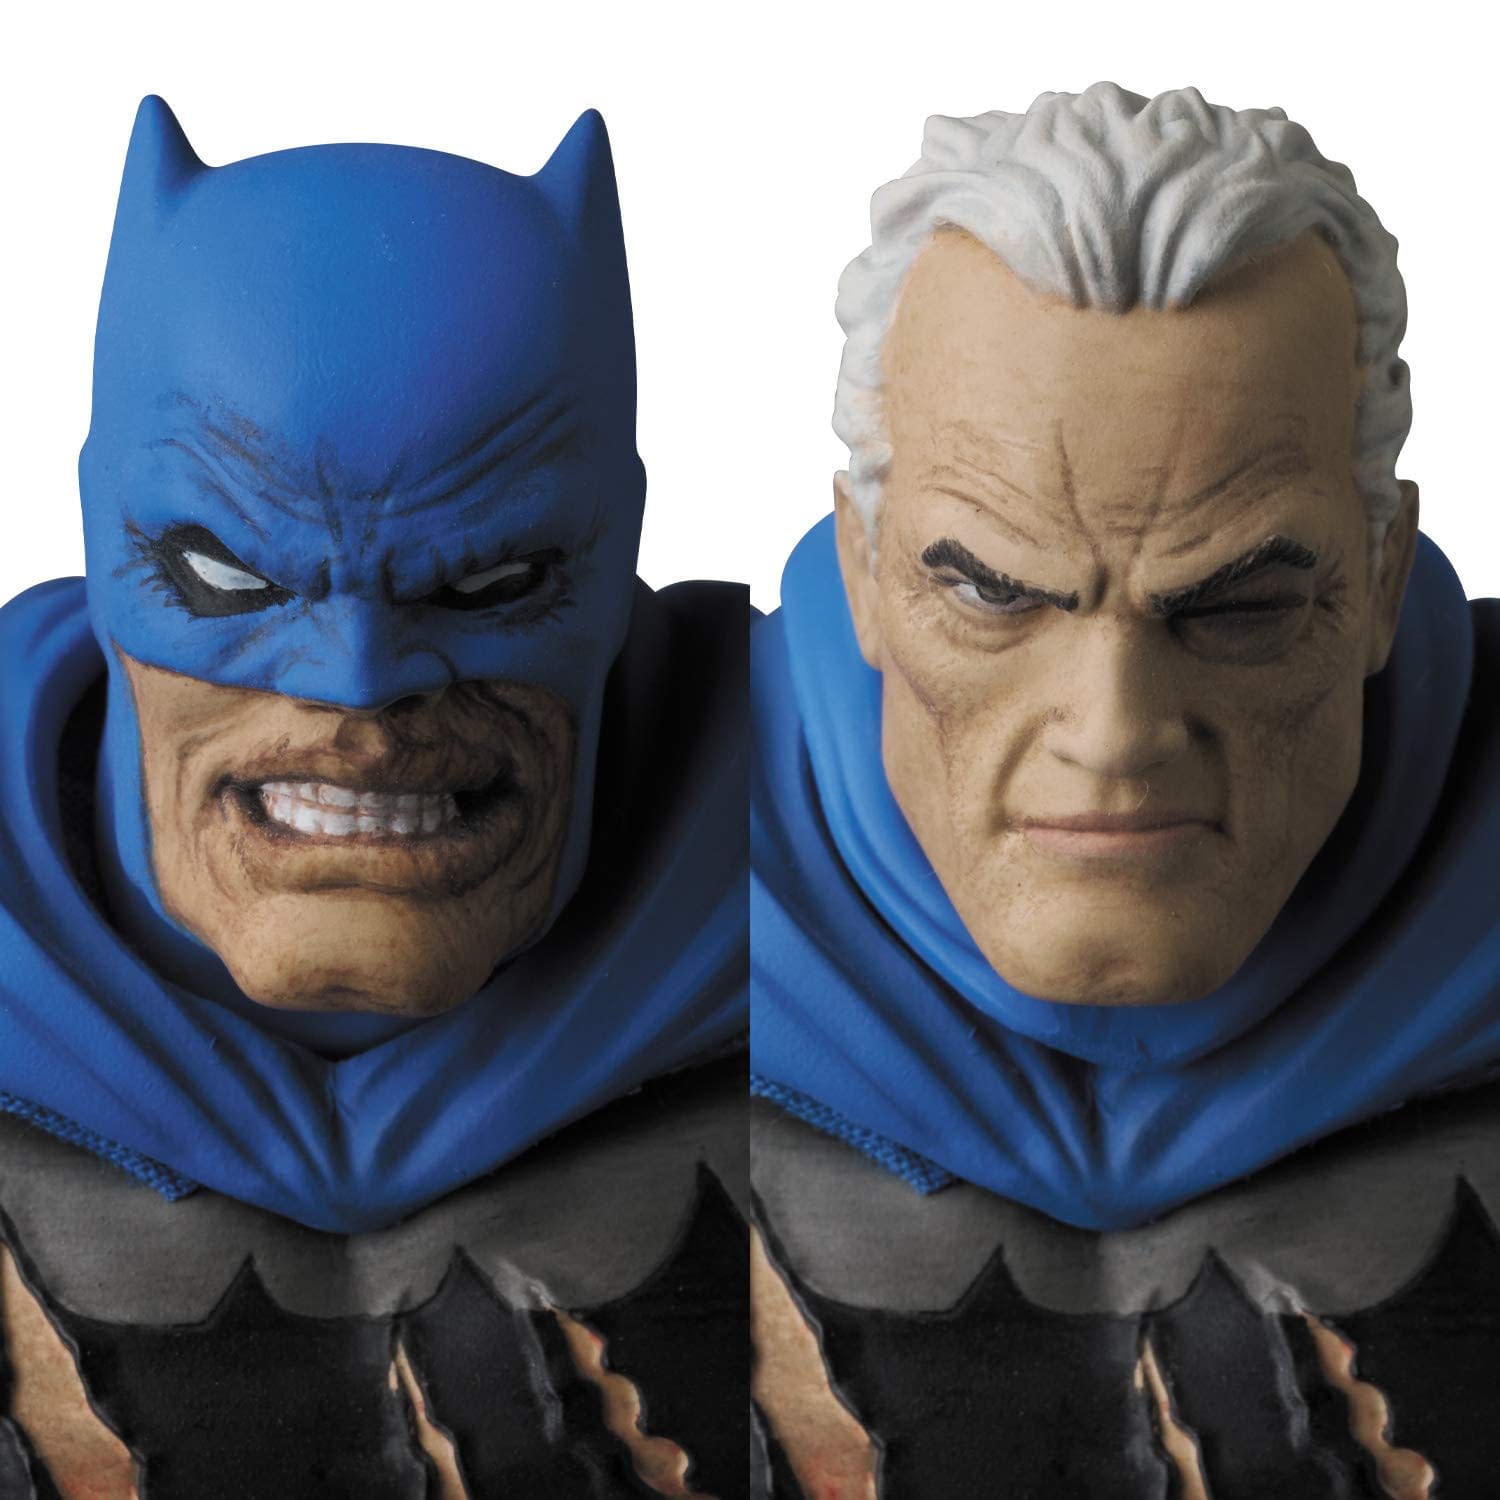 The Dark Knight Returns Gets a New Figure from MAFEX